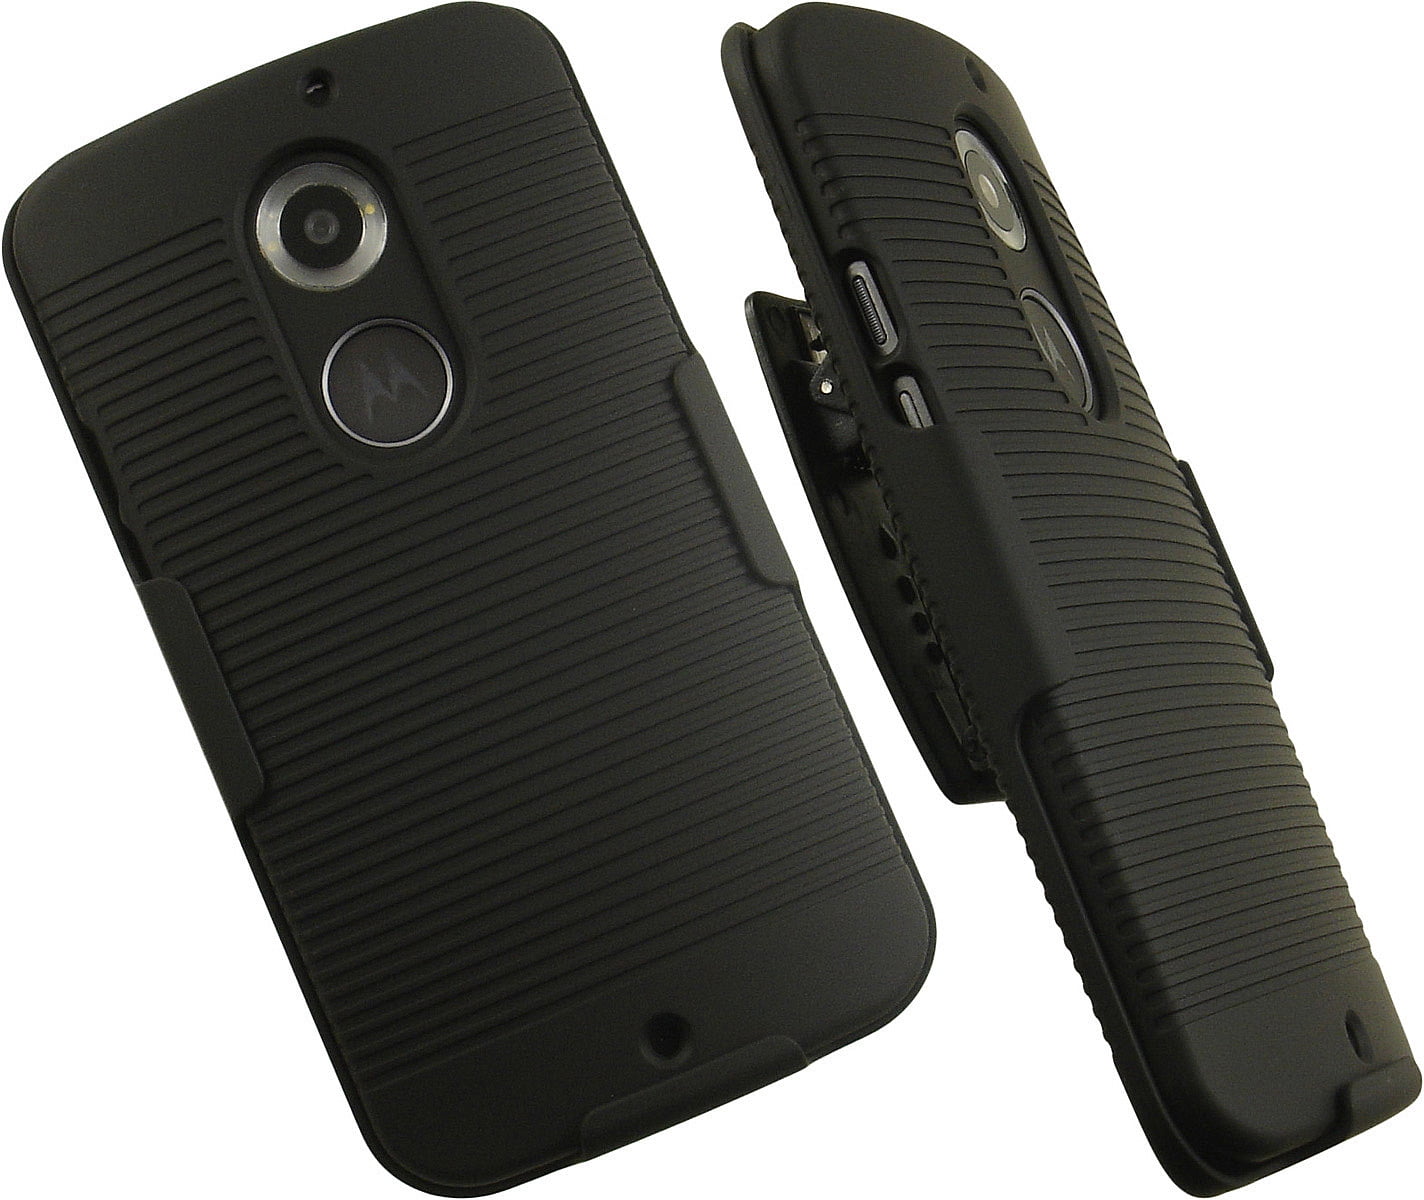 Entretenimiento Camion pesado encanto Case with Clip for Moto X 2nd Gen, Nakedcellphone Black Ribbed Hard Cover  with [Rotating/Ratchet] Belt Hip Holster for Motorola Moto X 2nd Generation  (2014) XT1092, XT1093, XT1095, XT1096, XT1097 - Walmart.com